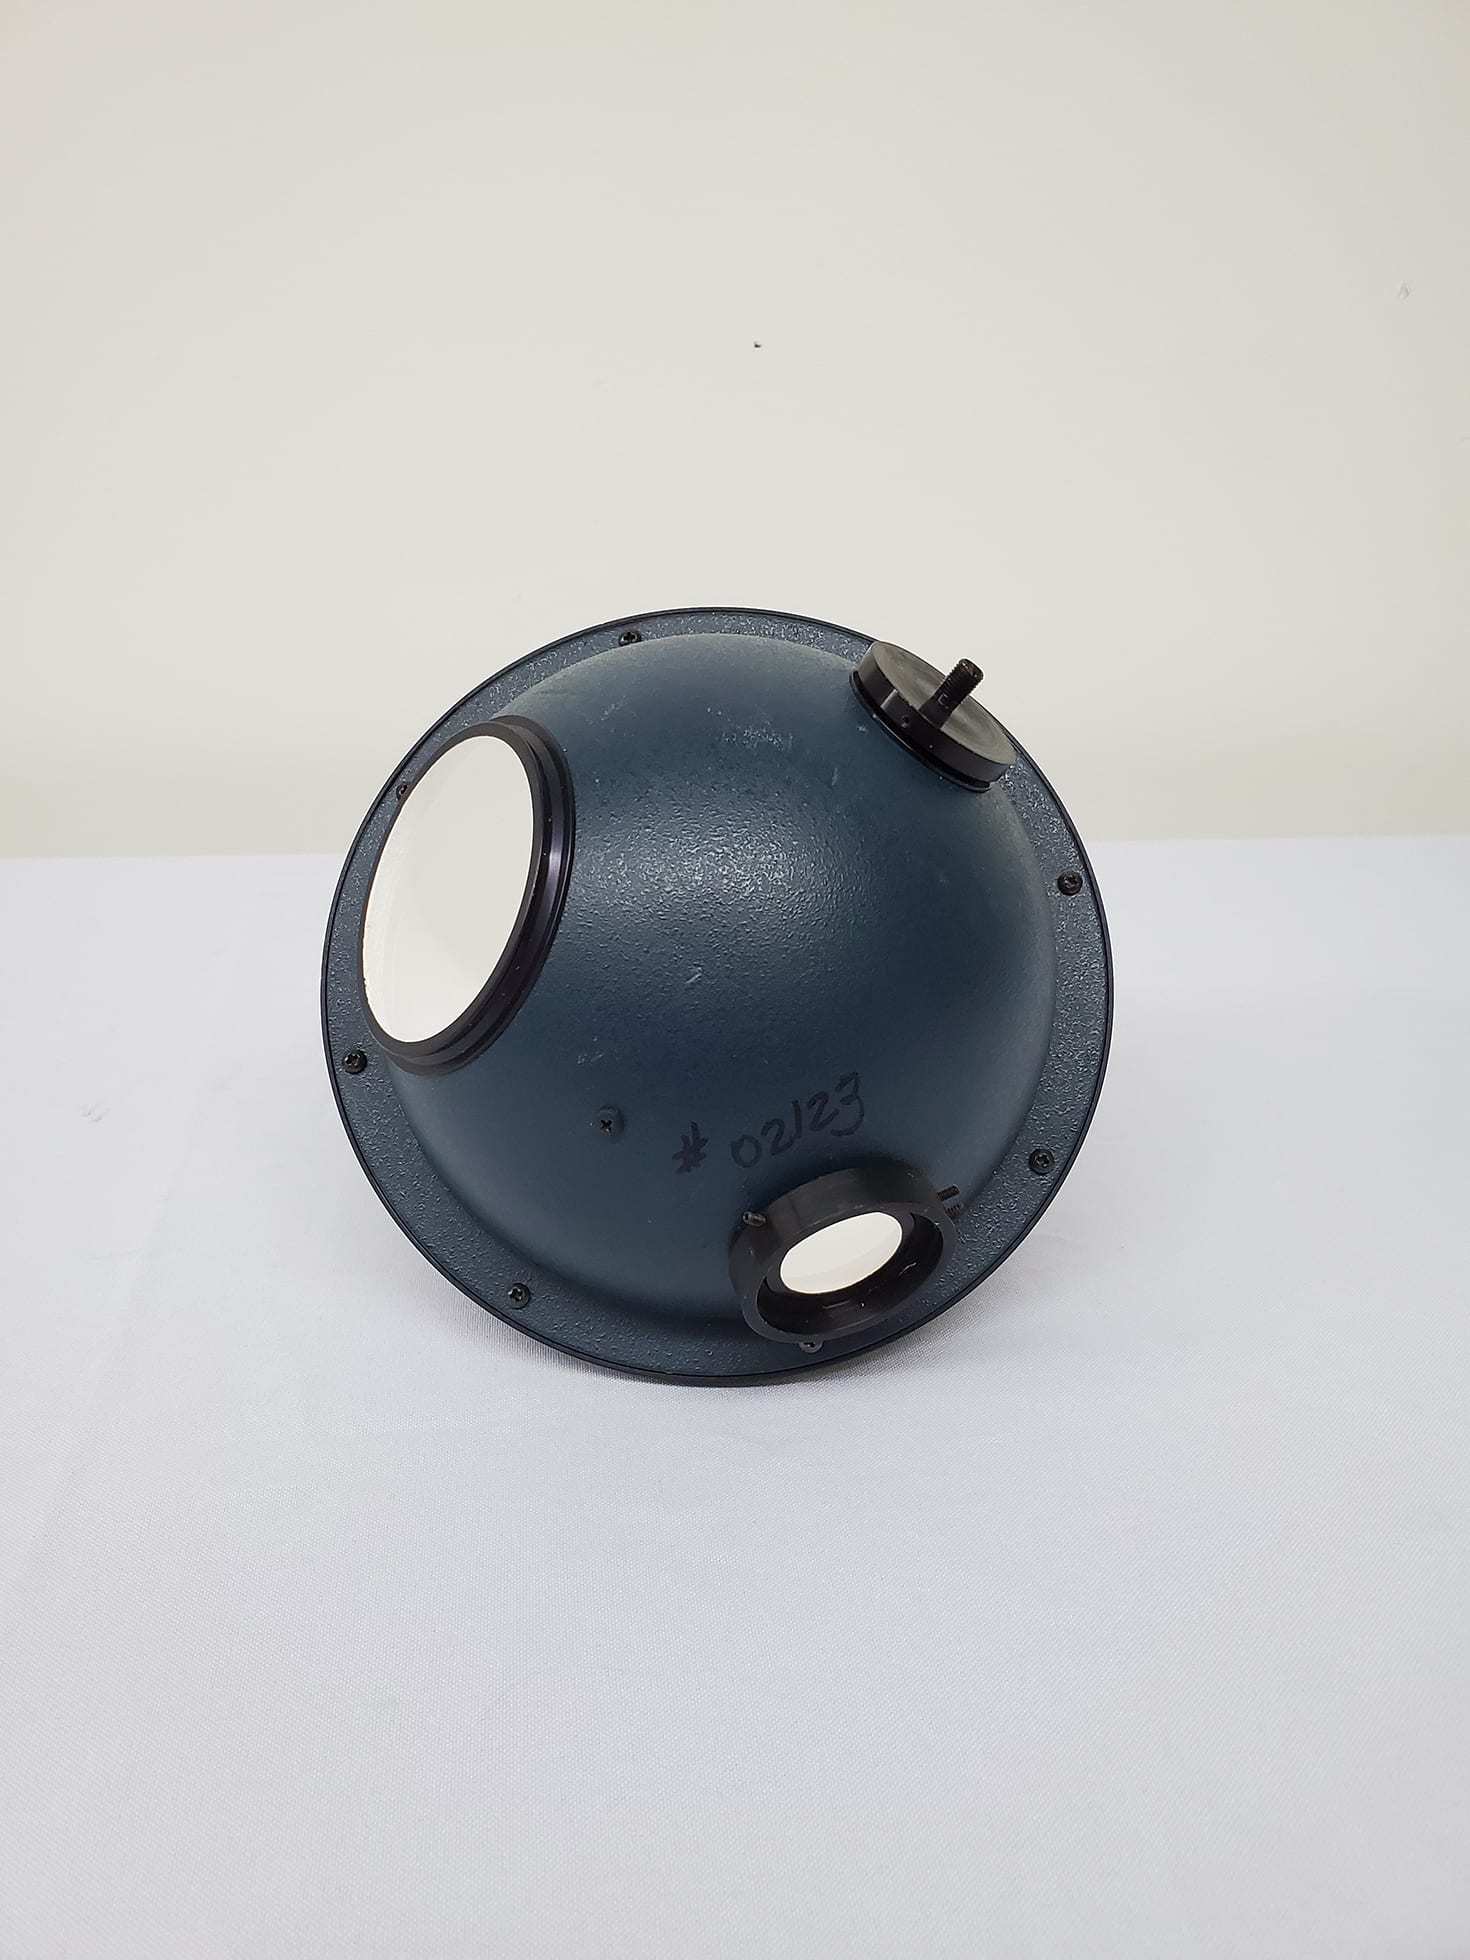 Newport-819 C-Spectralon Collimated Beam Integrating Sphere-57485 For Sale